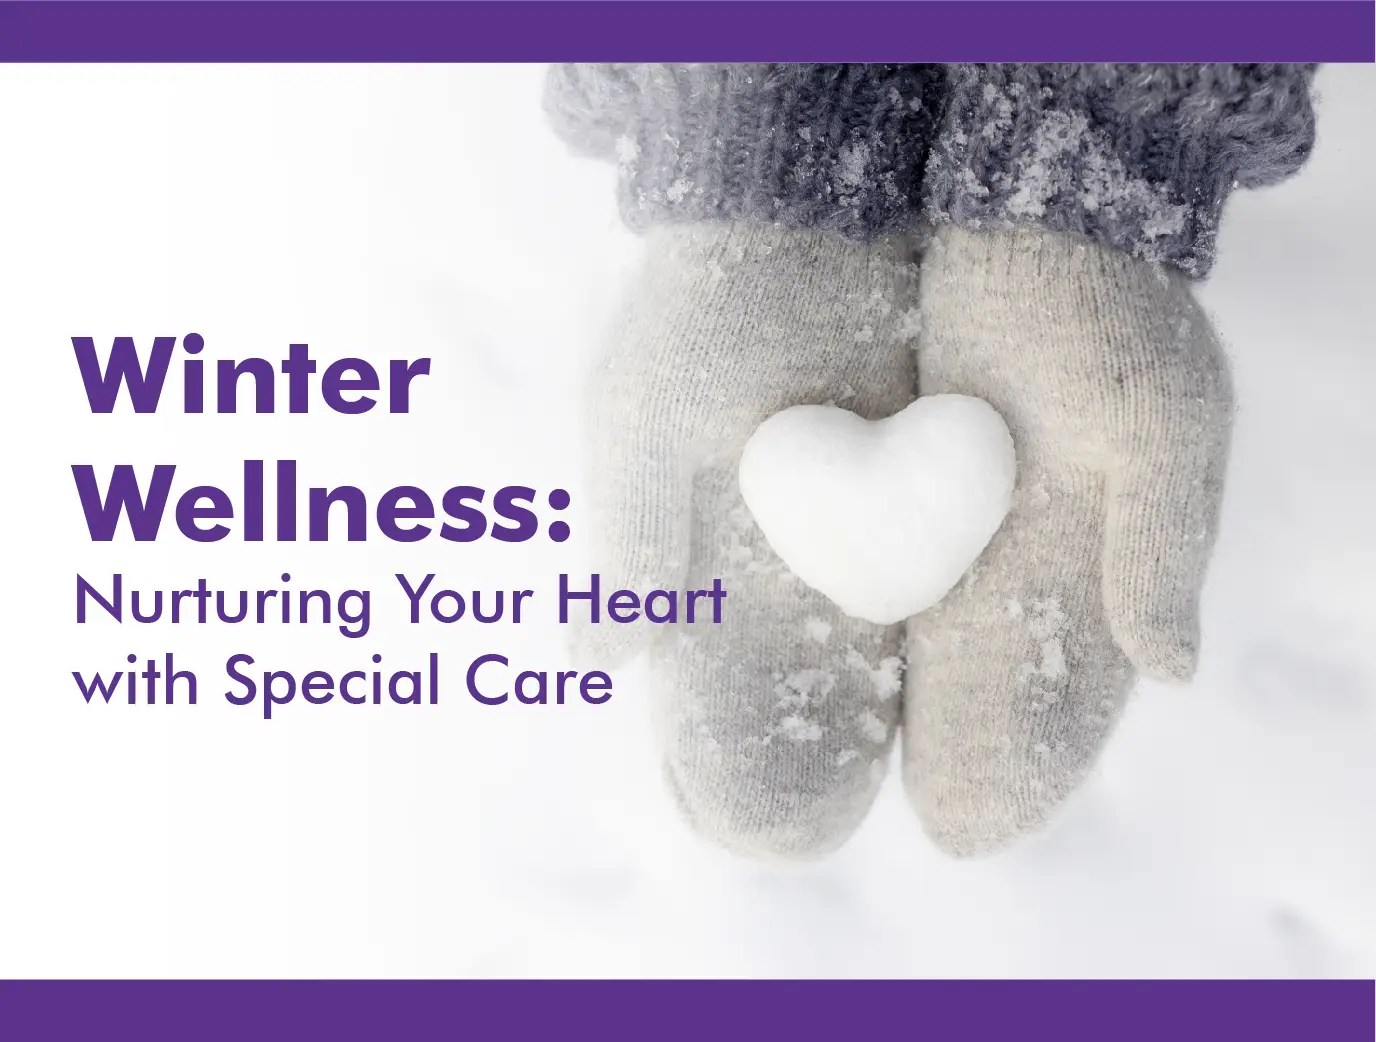 Winter Wellness: Nurturing Your Heart with Special Care